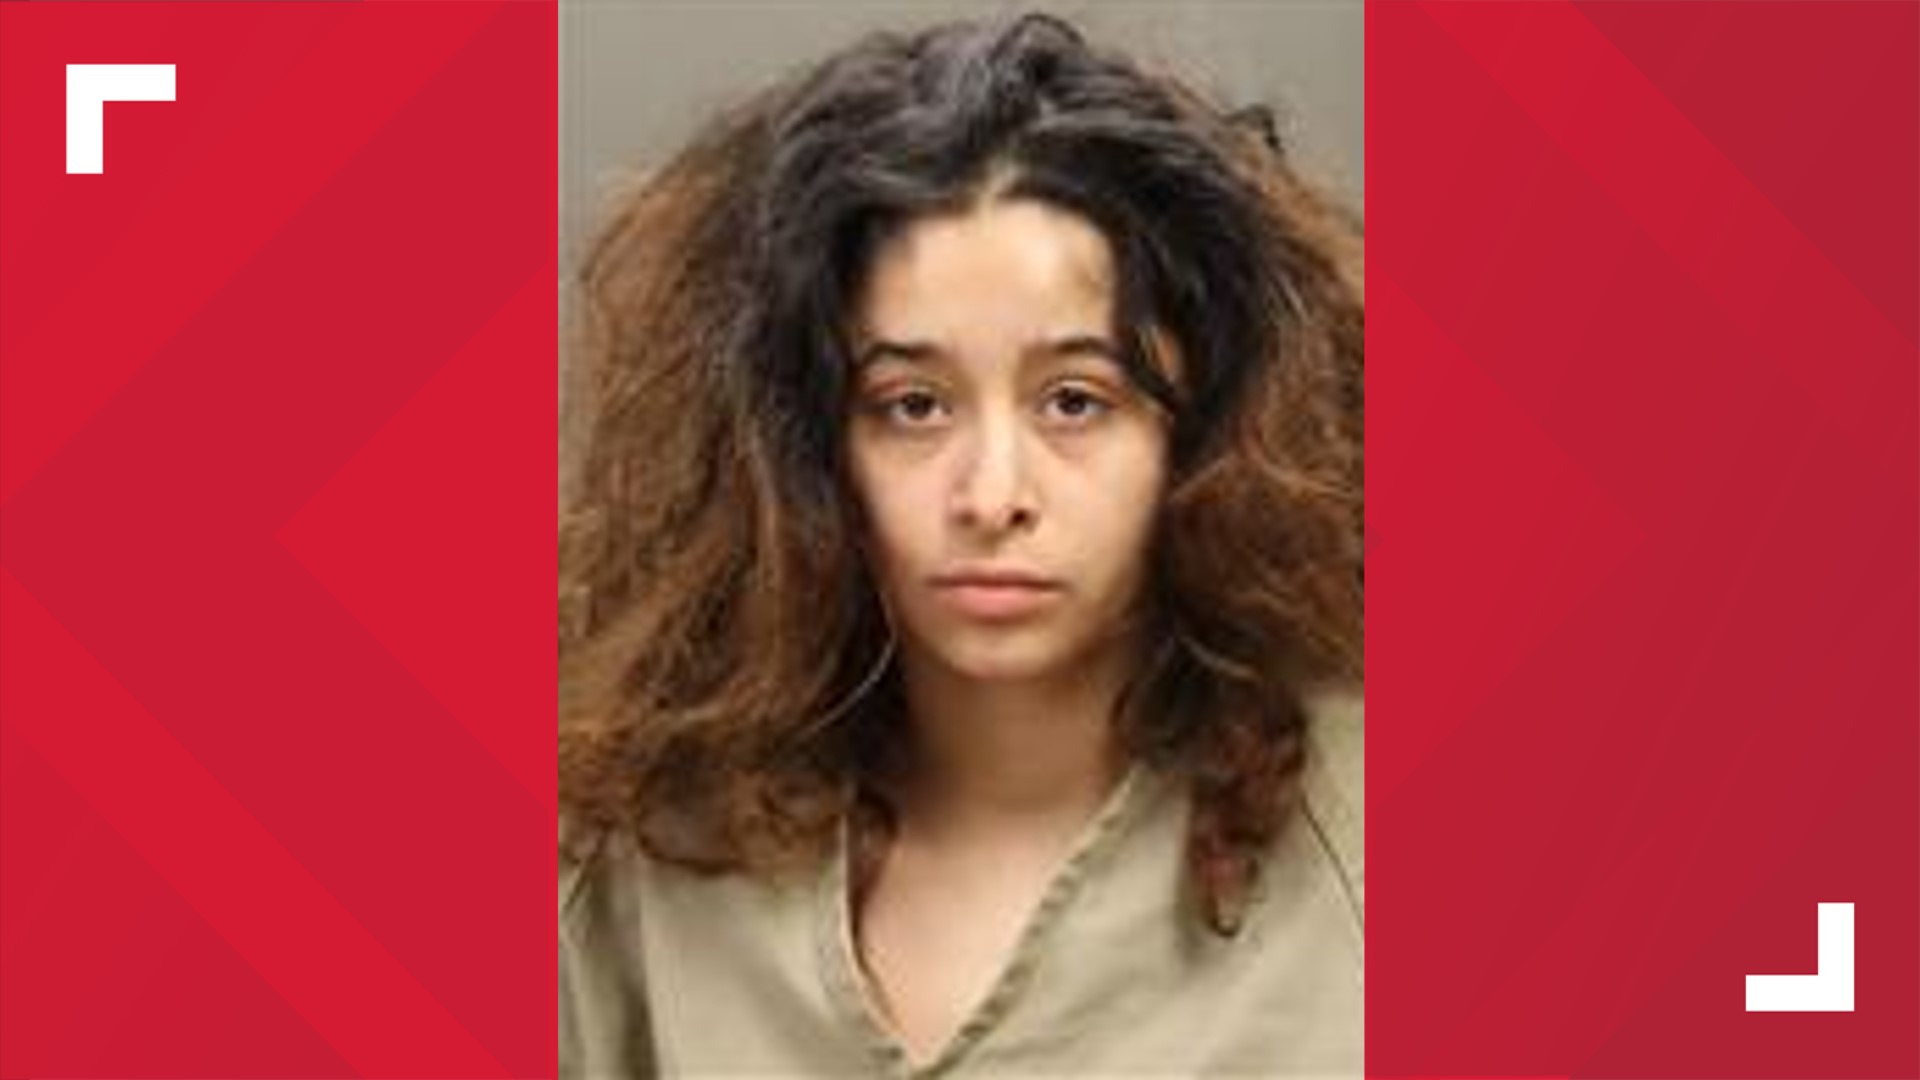 Bianca Soto was arrested and charged with aggravated robbery, which is a first-degree felony.